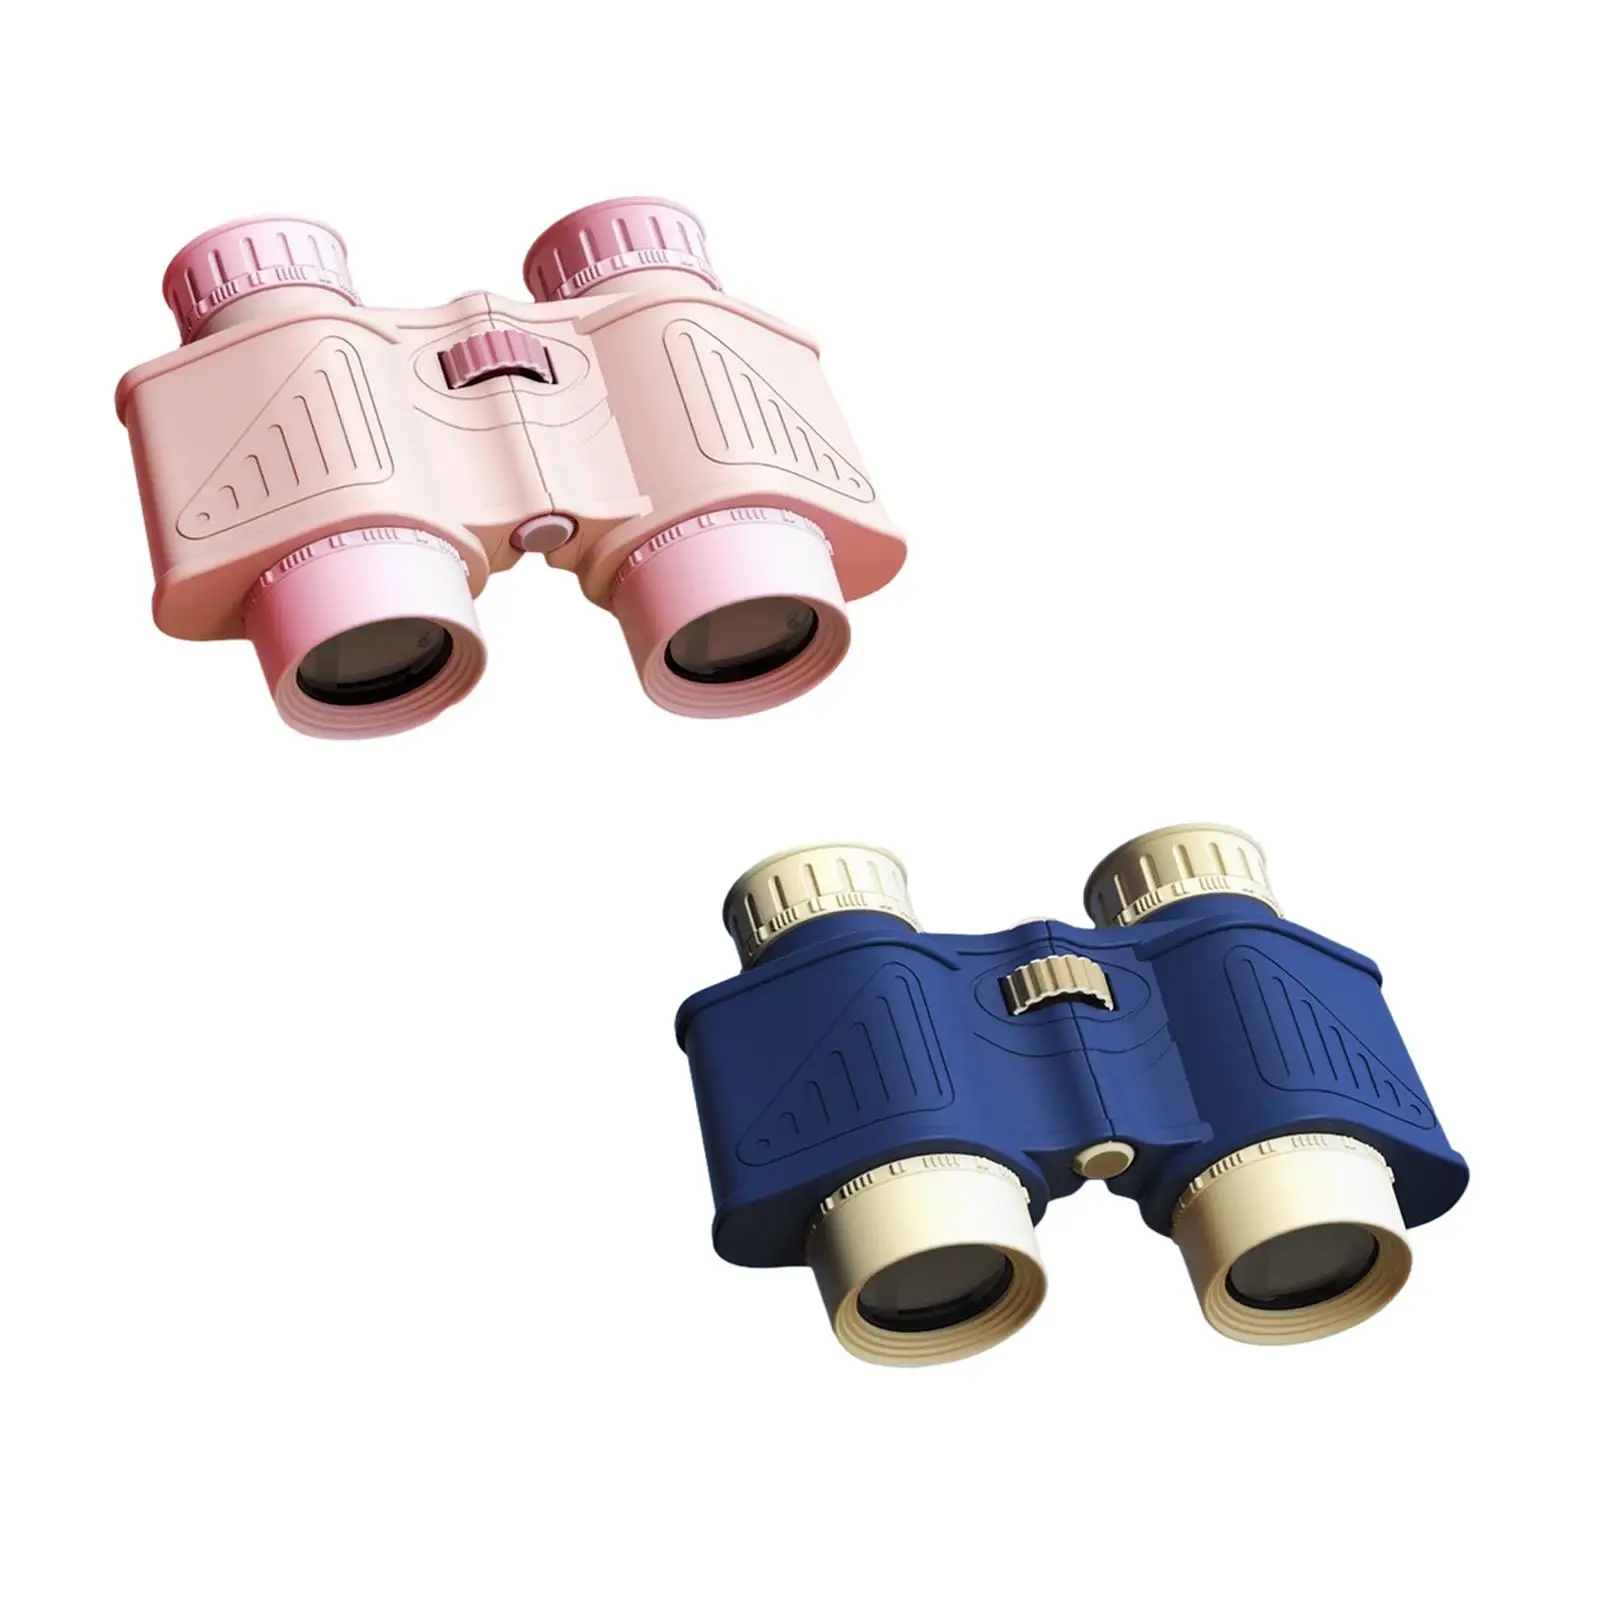 Kids Binoculars Magnifying Glass Adjustable Interpupillary Distance Portable for Outdoor Party Favors Hunting Camping Hiking